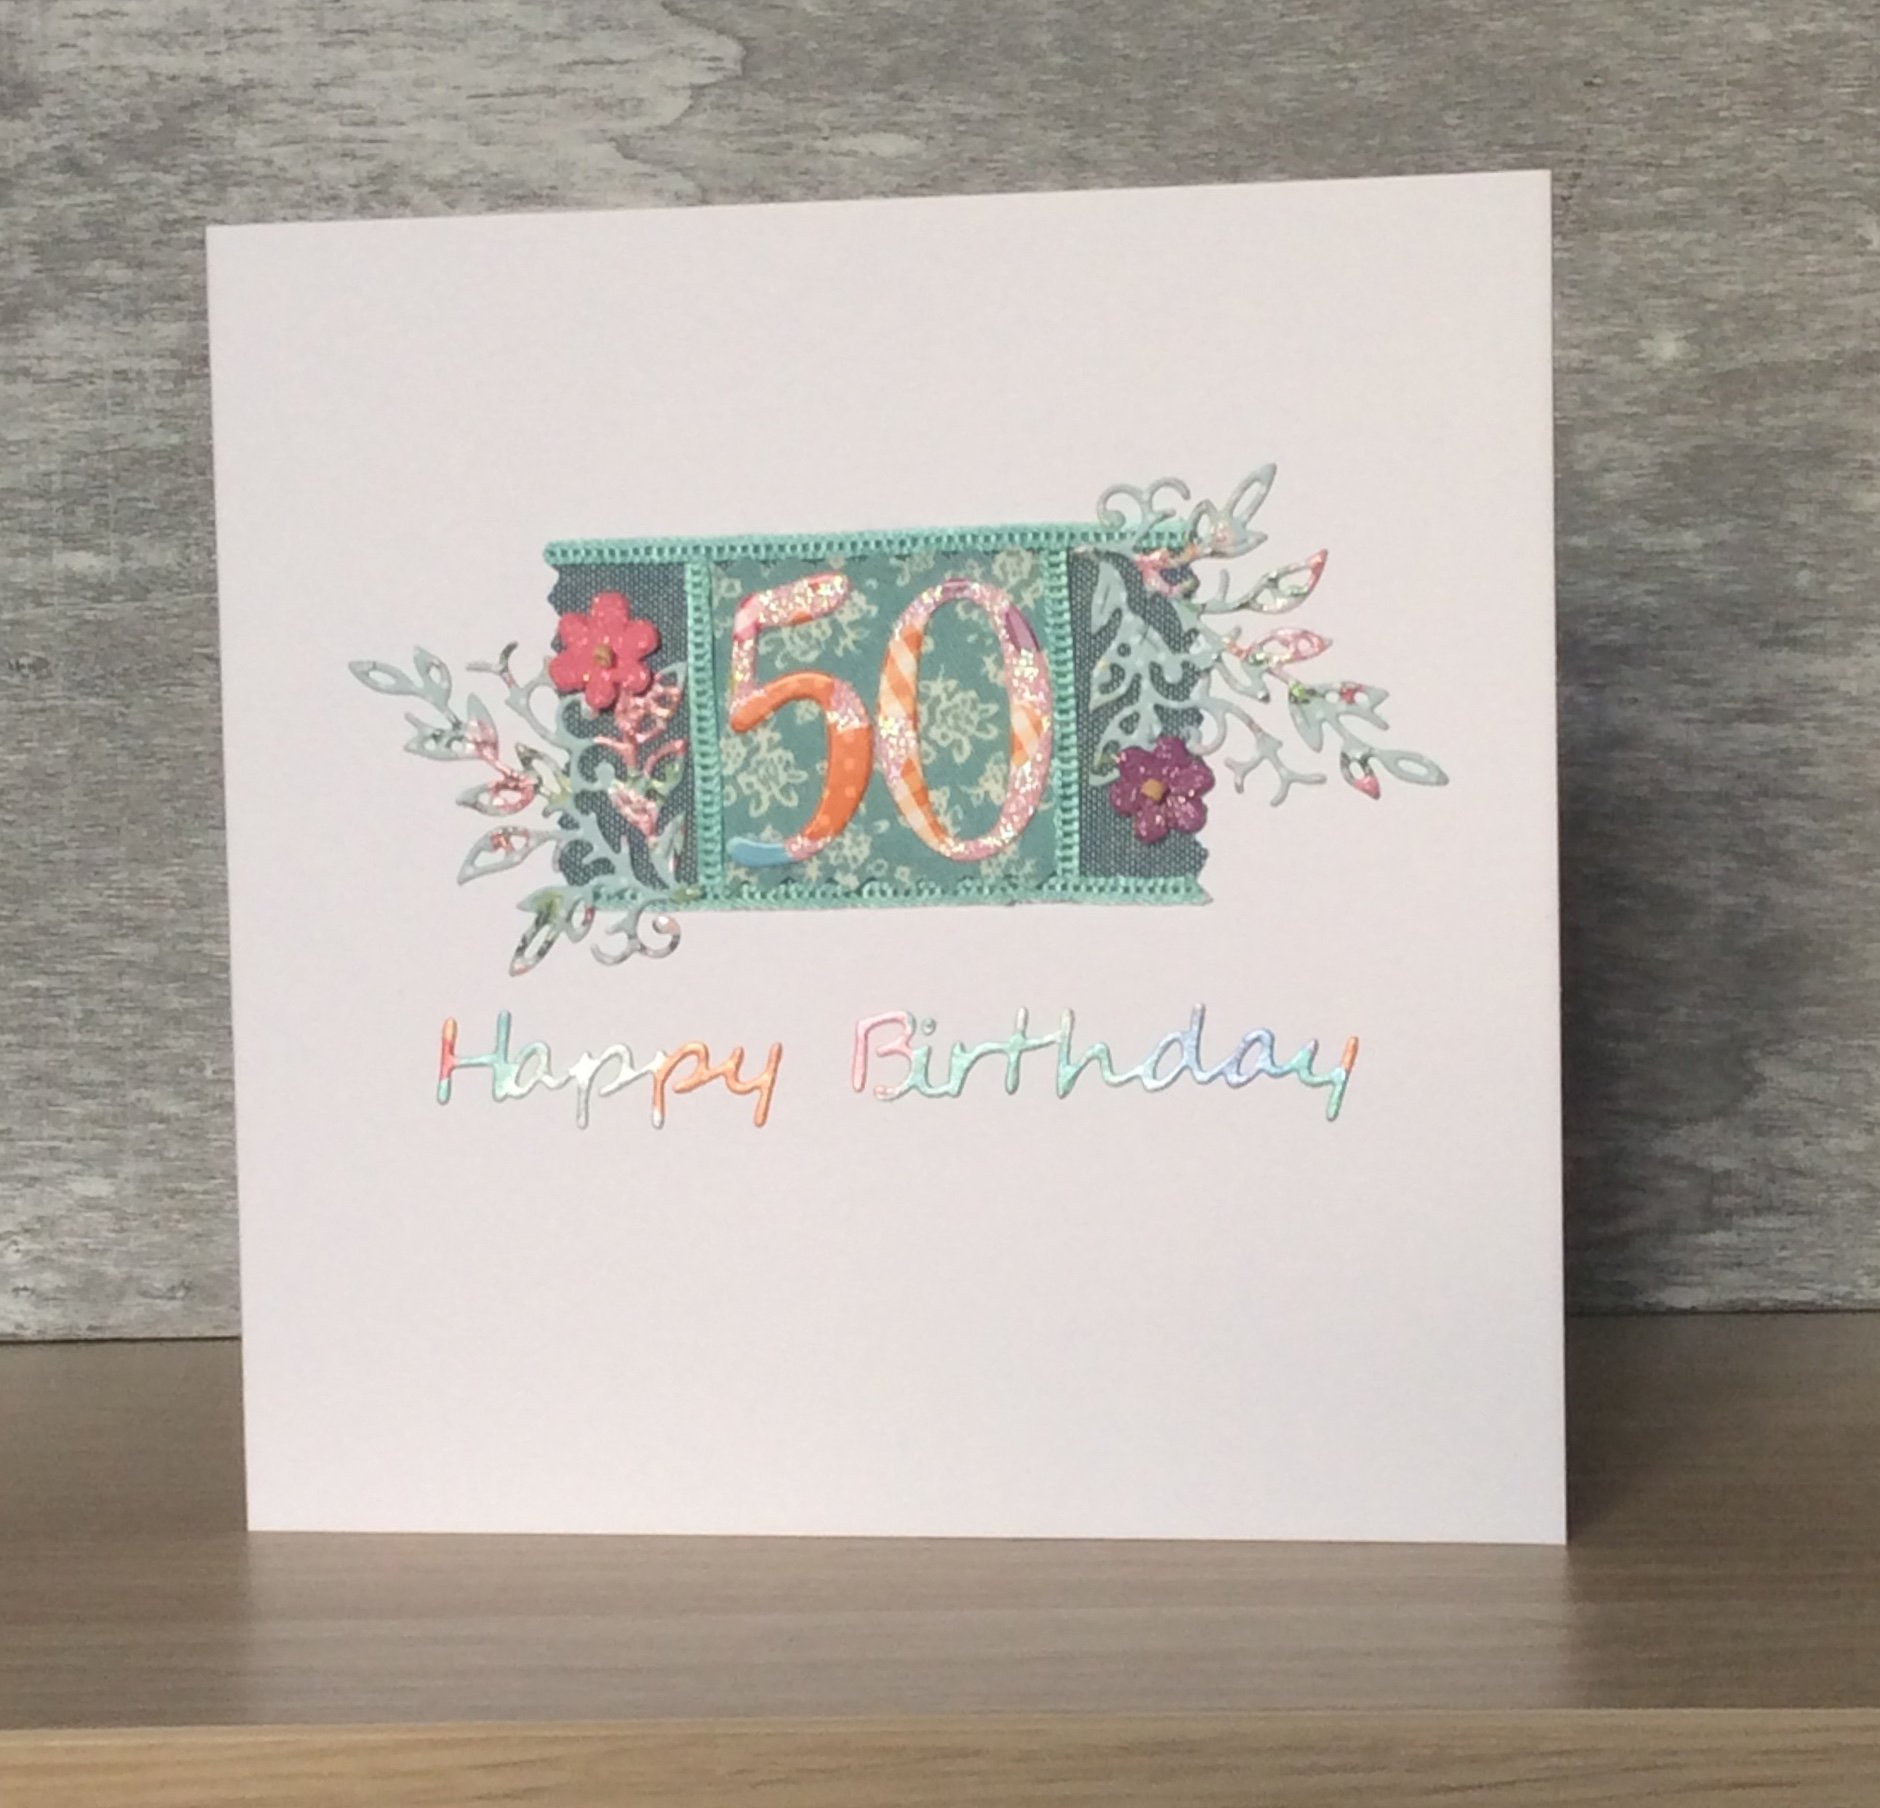 Handmade 50Th Birthday Card Ideas Handmade Greeting Cards Pretty Birthday Cards Using Teal Coloured Ribbons 50th 60th And 70th